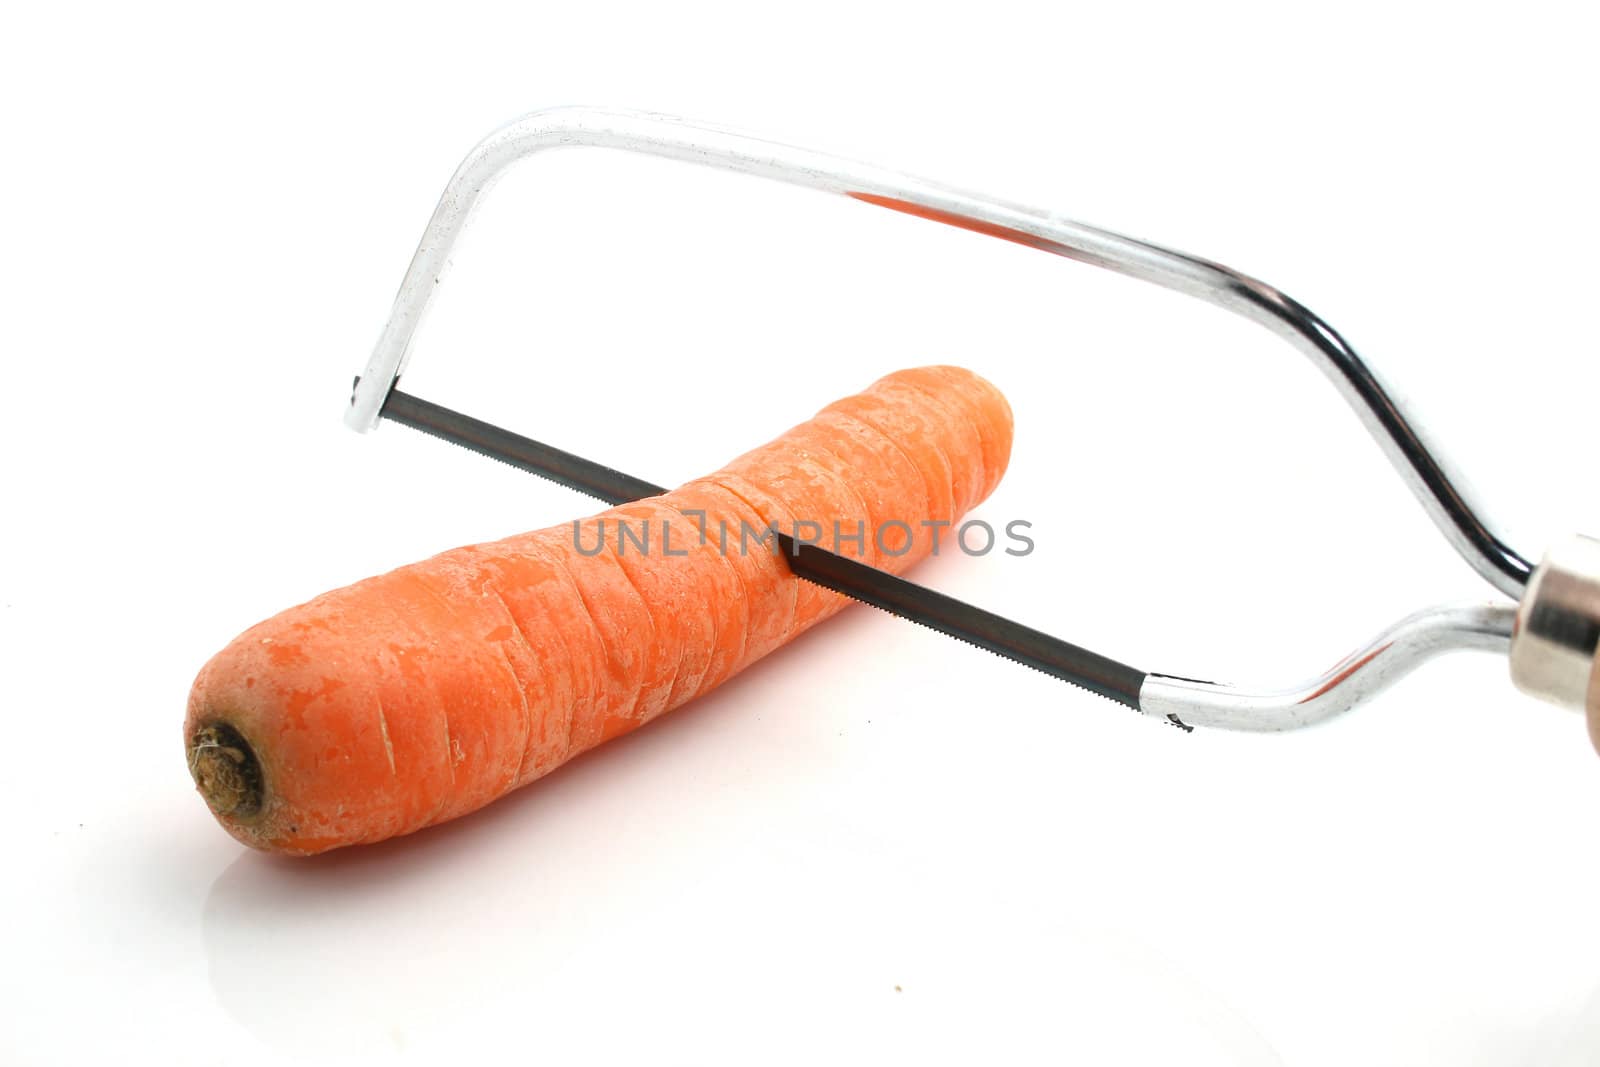 a carrot with a metal saw on white background